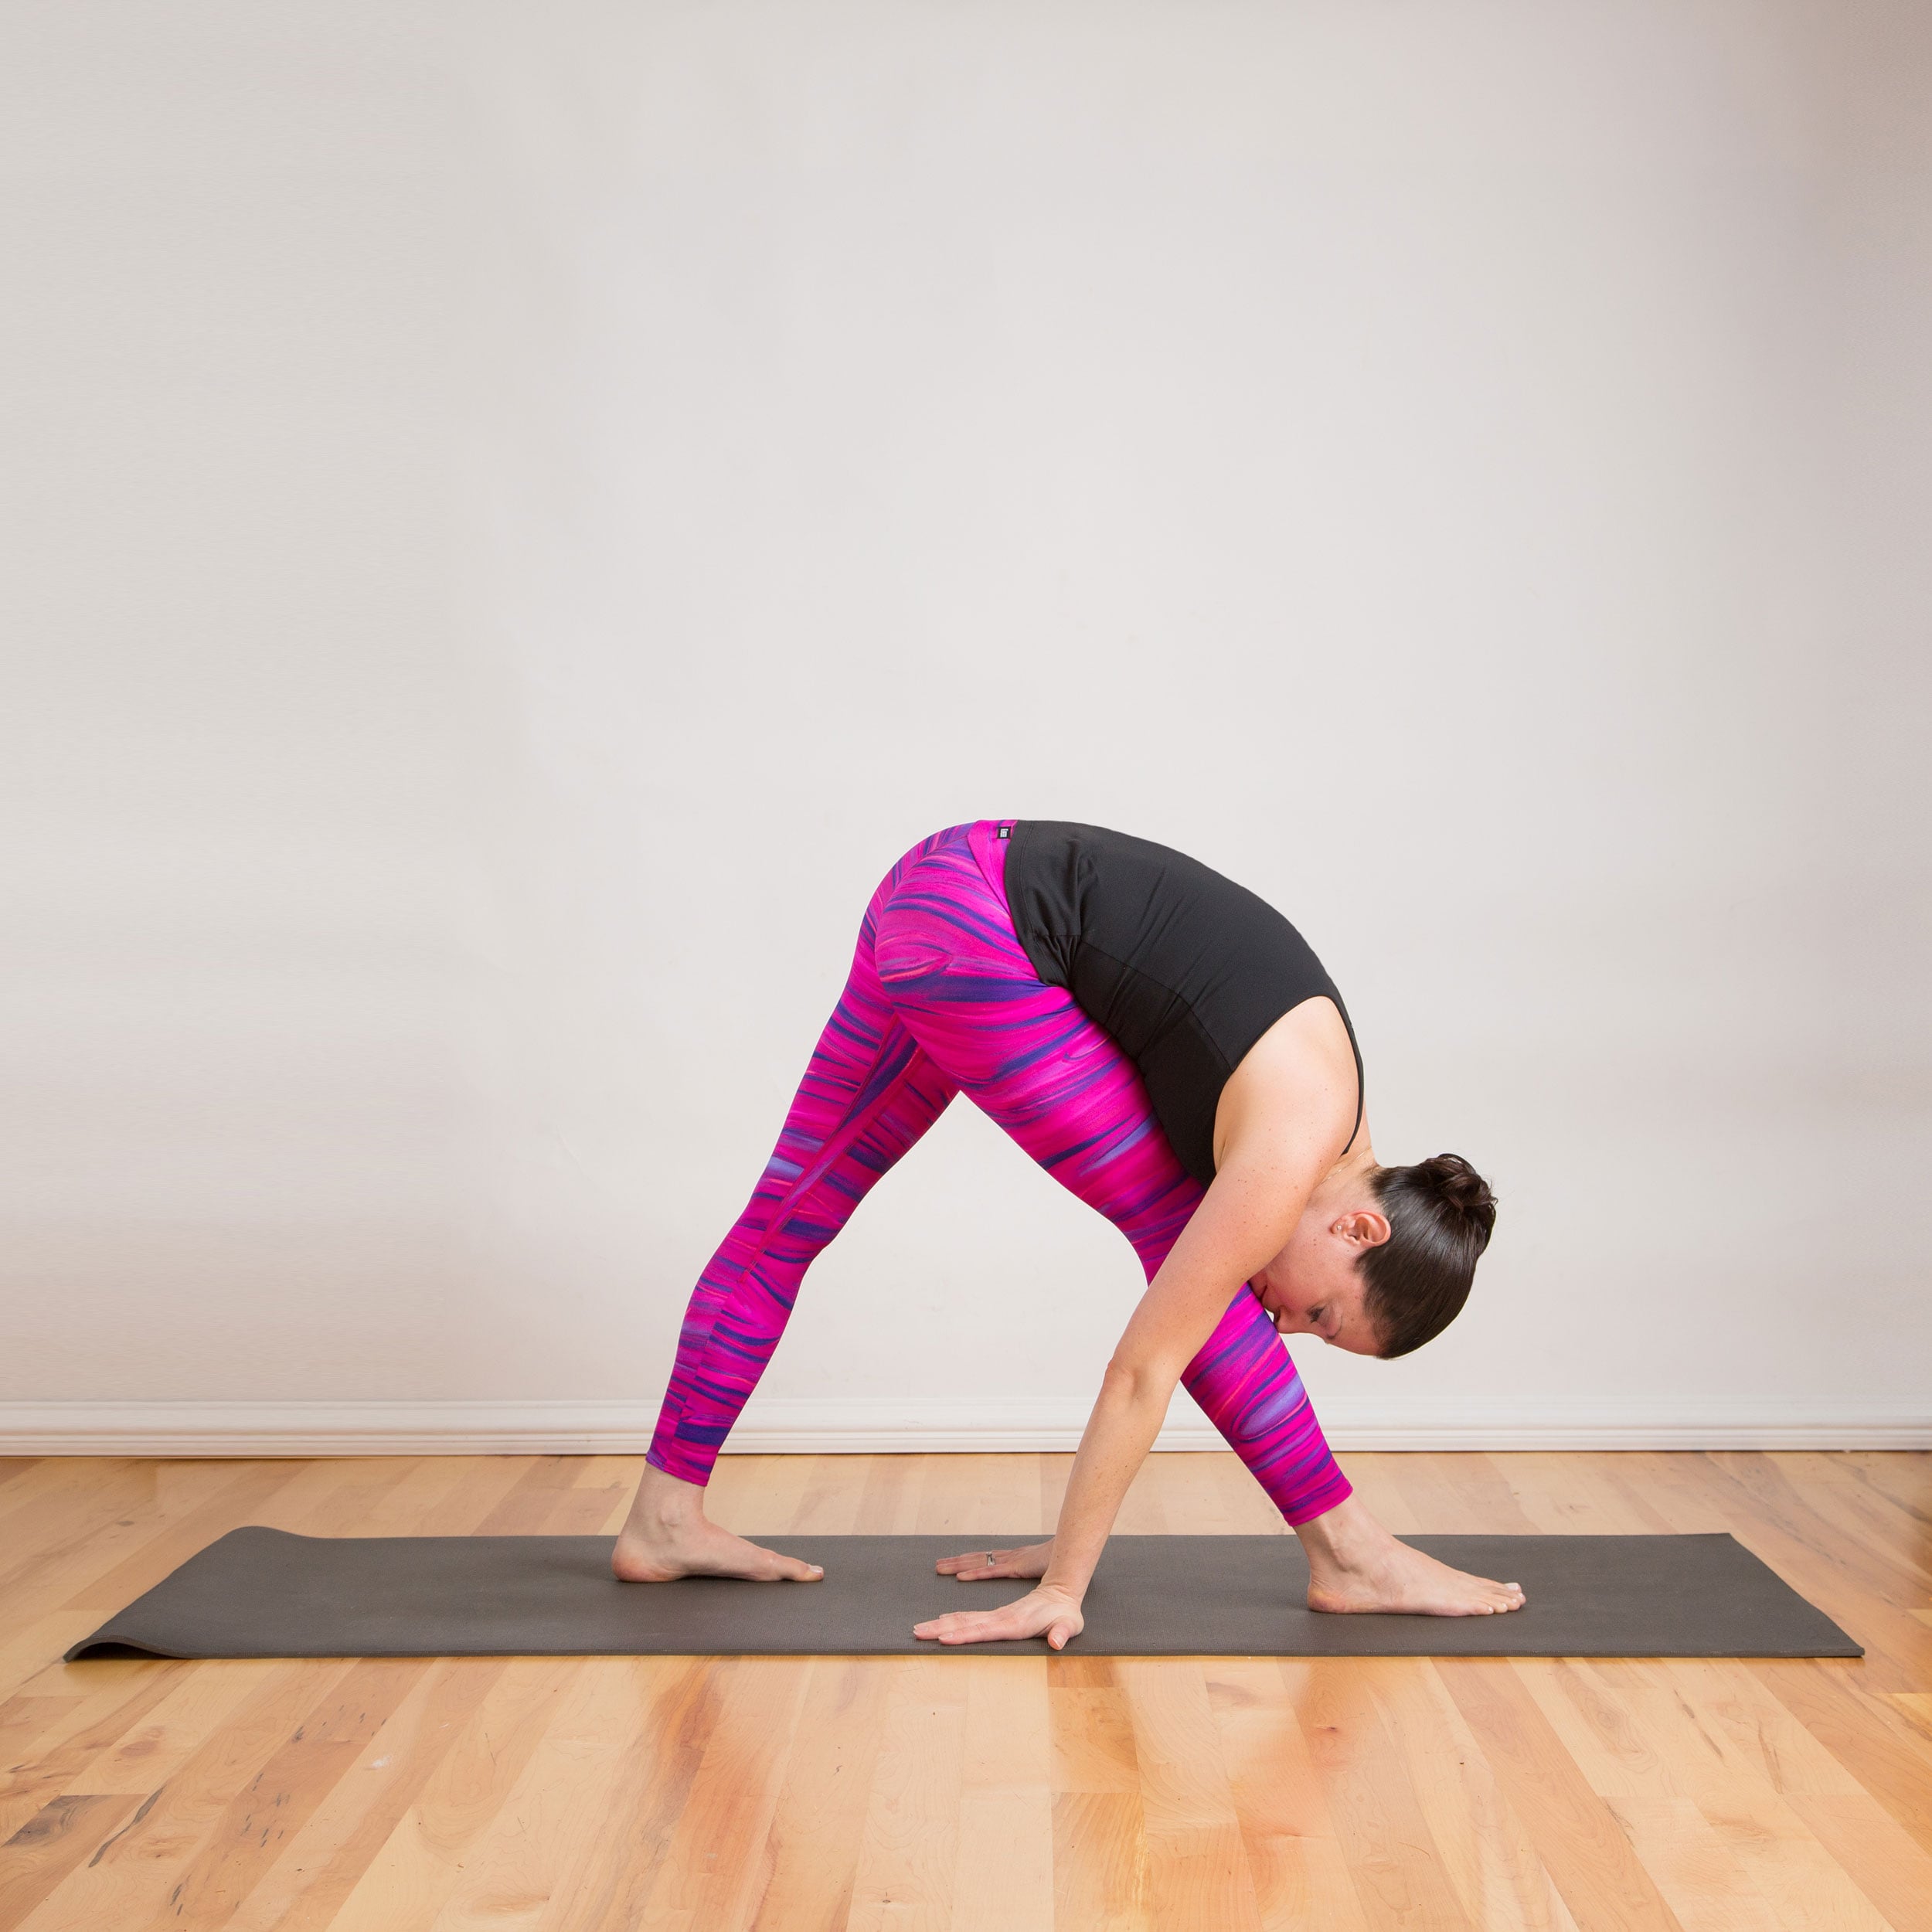 10 Alignment Tips To Improve Your Downward Dog - DoYou